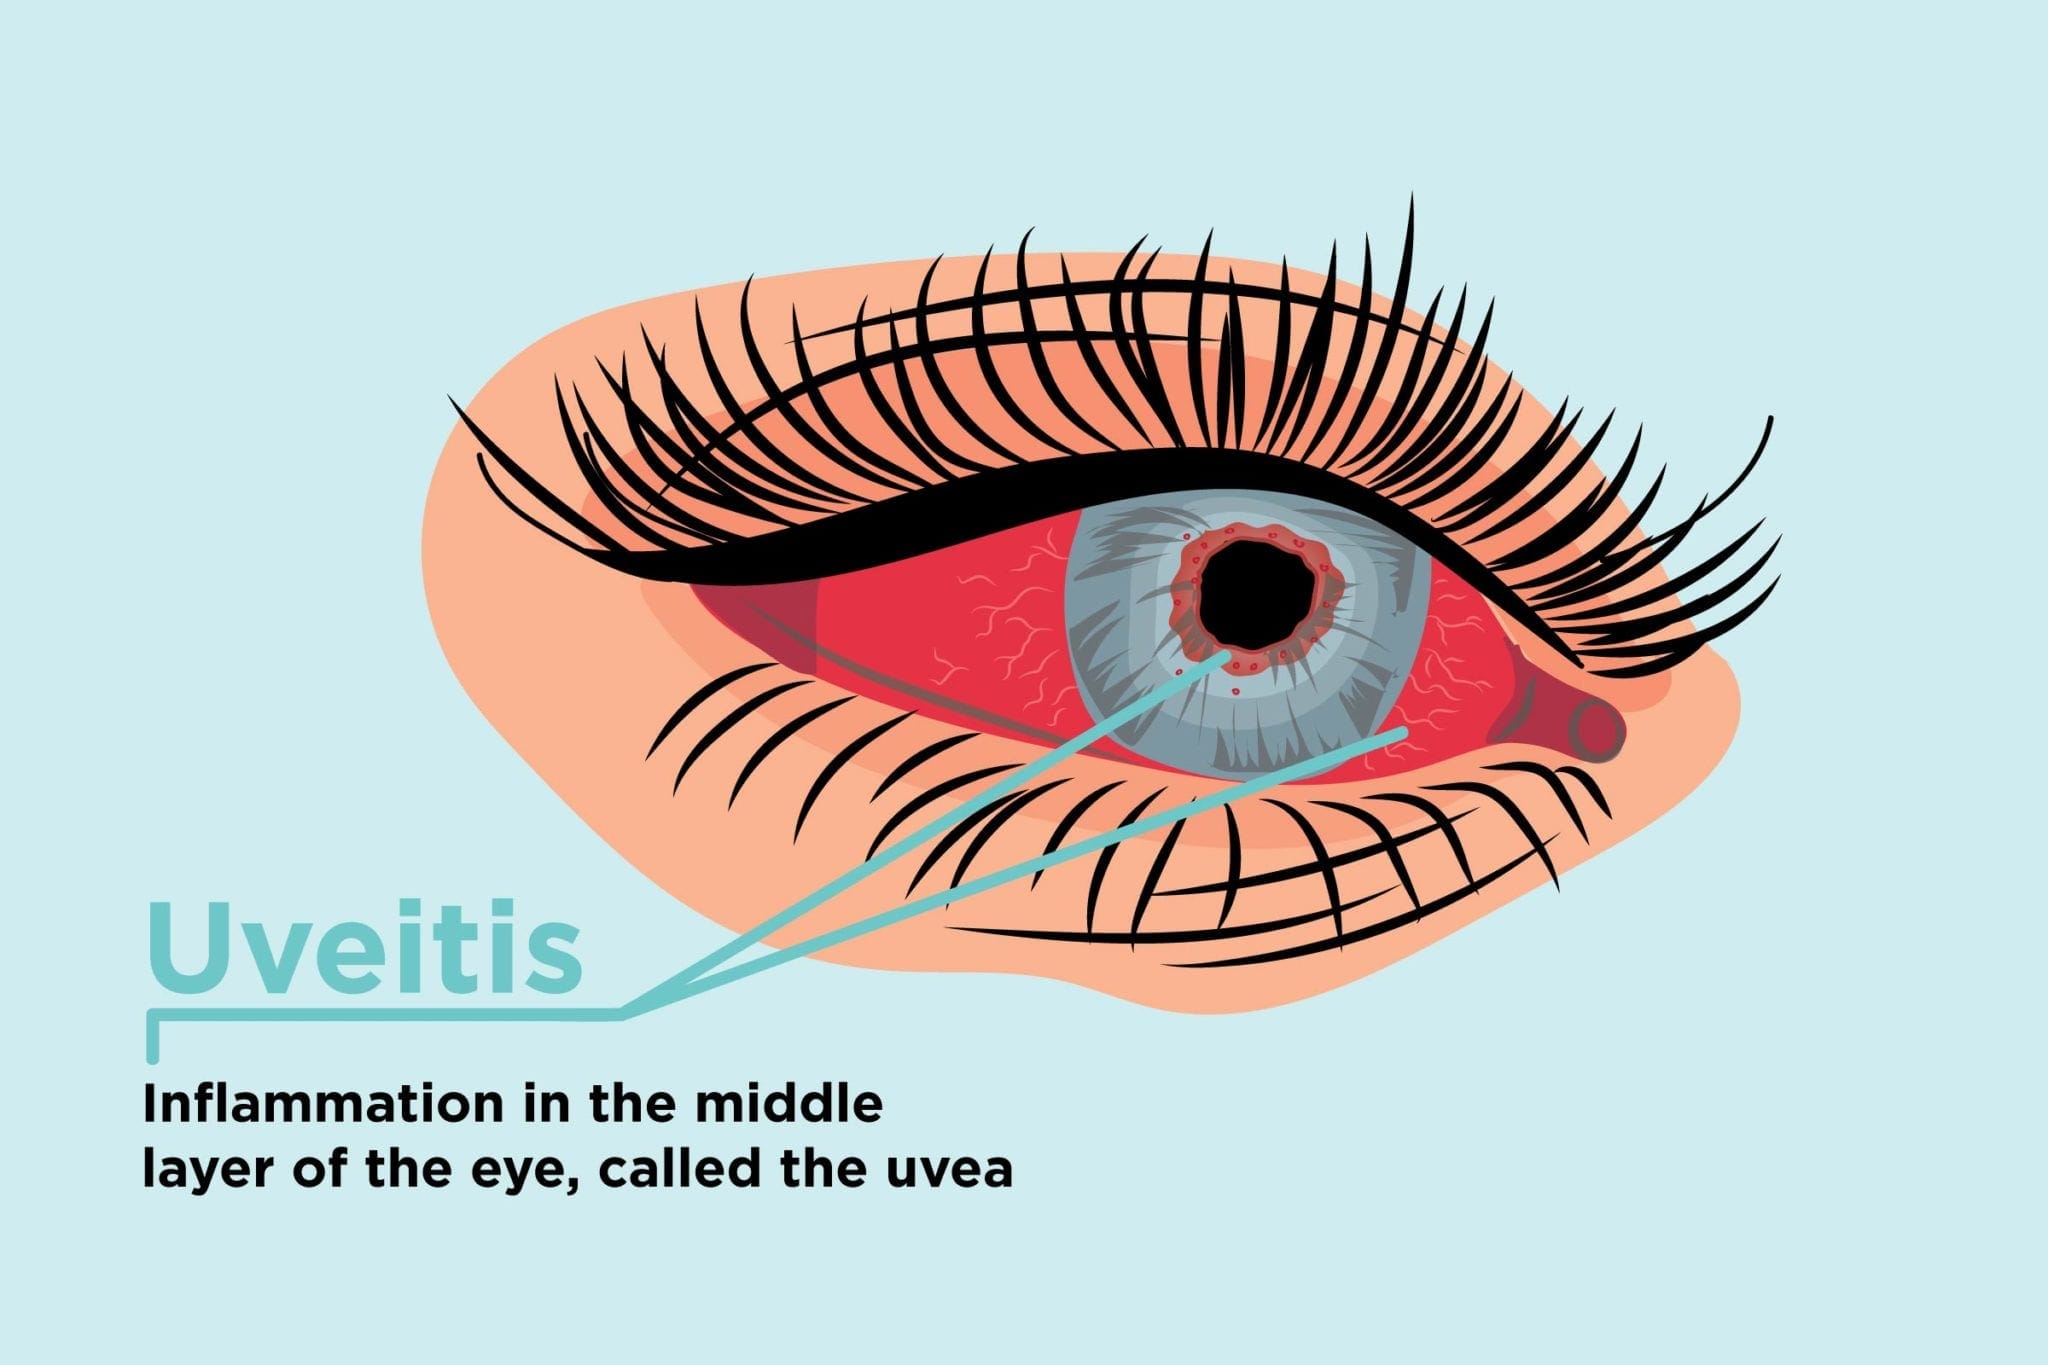 A new Diagnostic method for Posterior Uveitis has been discovered